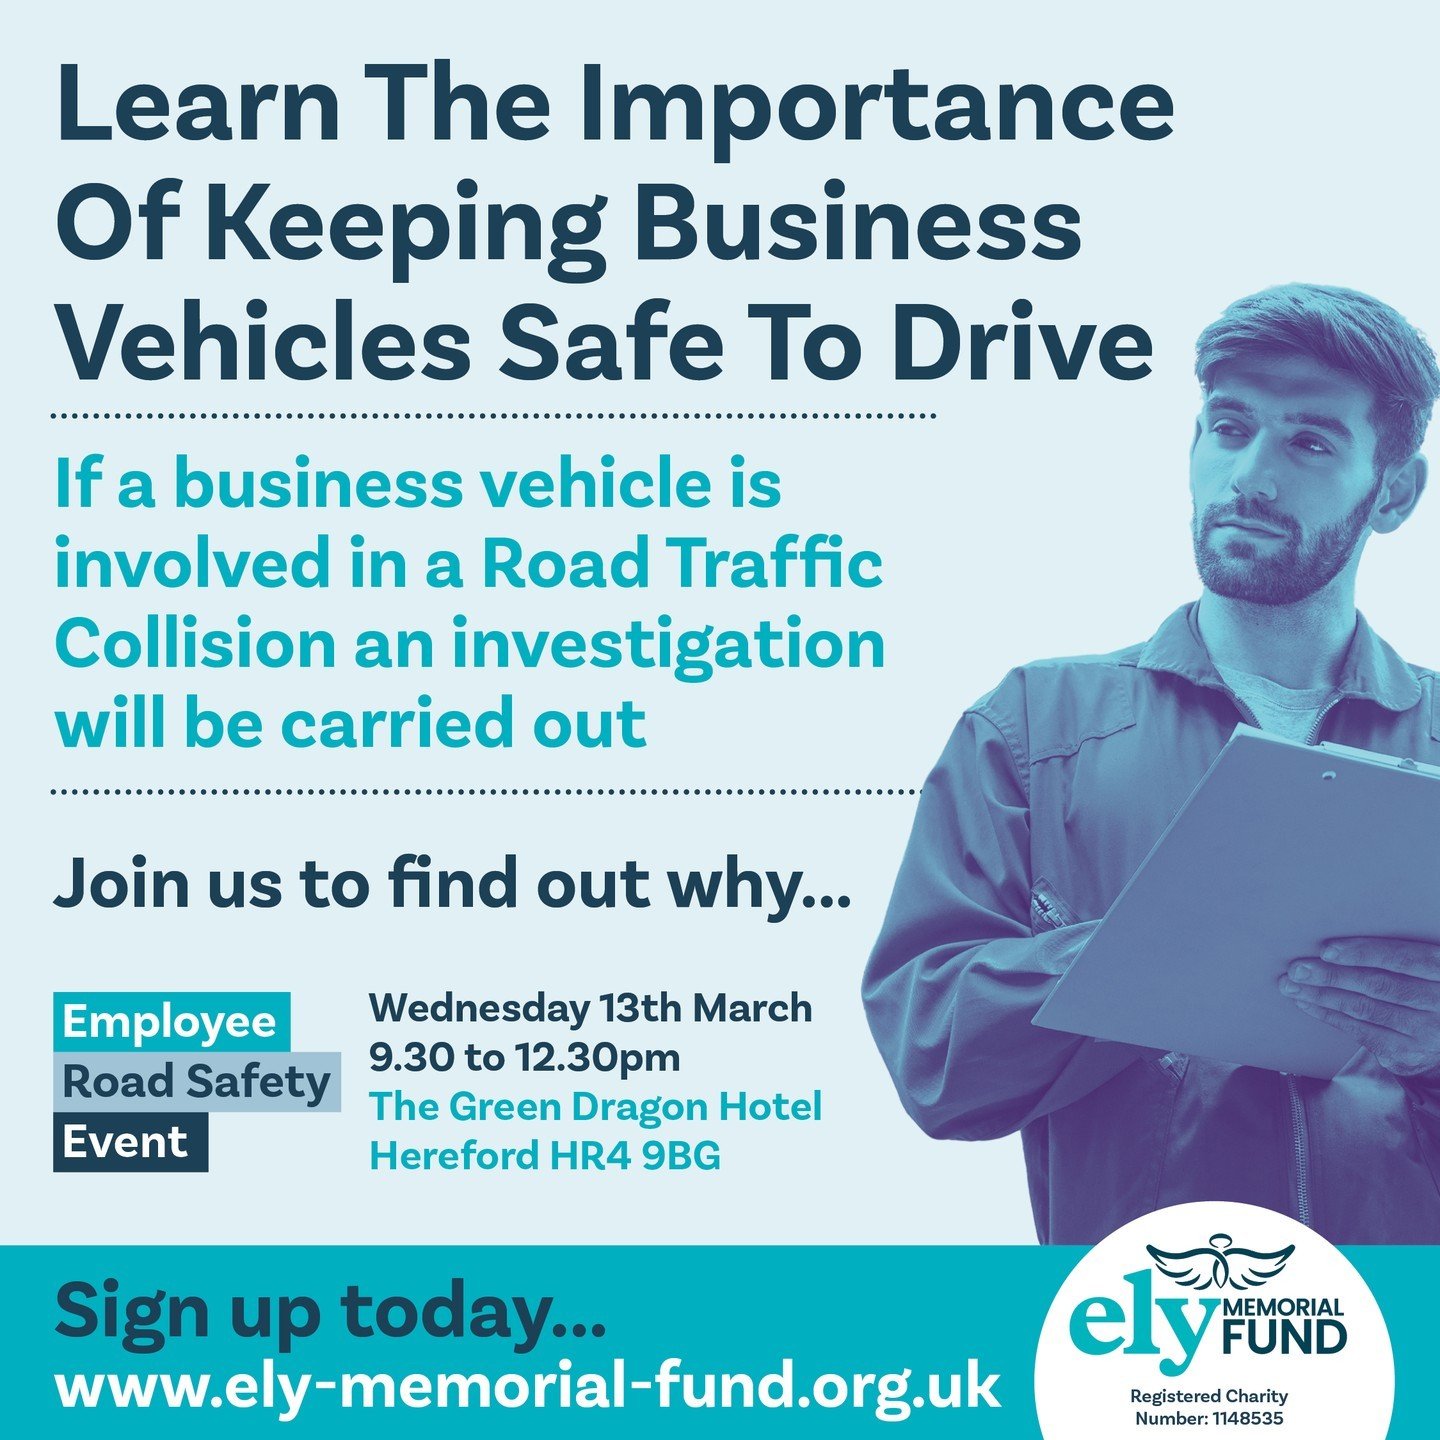 Bookings close in just one hour!

Final call to attend our FREE Employee Road Safety Event tomorrow.

Book online now https://ow.ly/w97F50QQG2s

#drivingsafely #Resources #workplace #StaySafeOnTheRoads